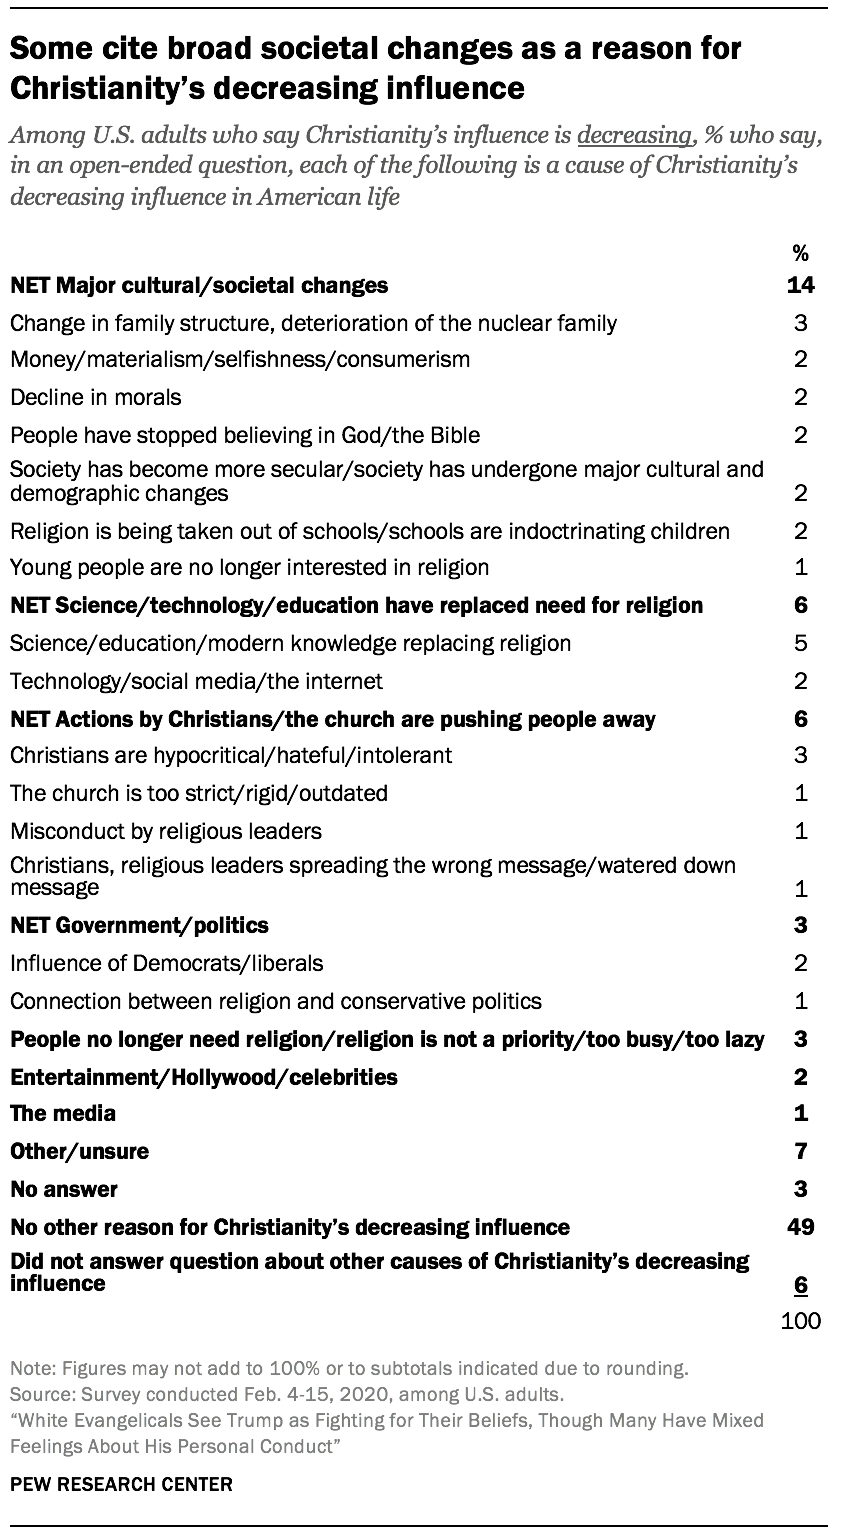 Some cite broad societal changes as a reason for Christianity’s decreasing influence